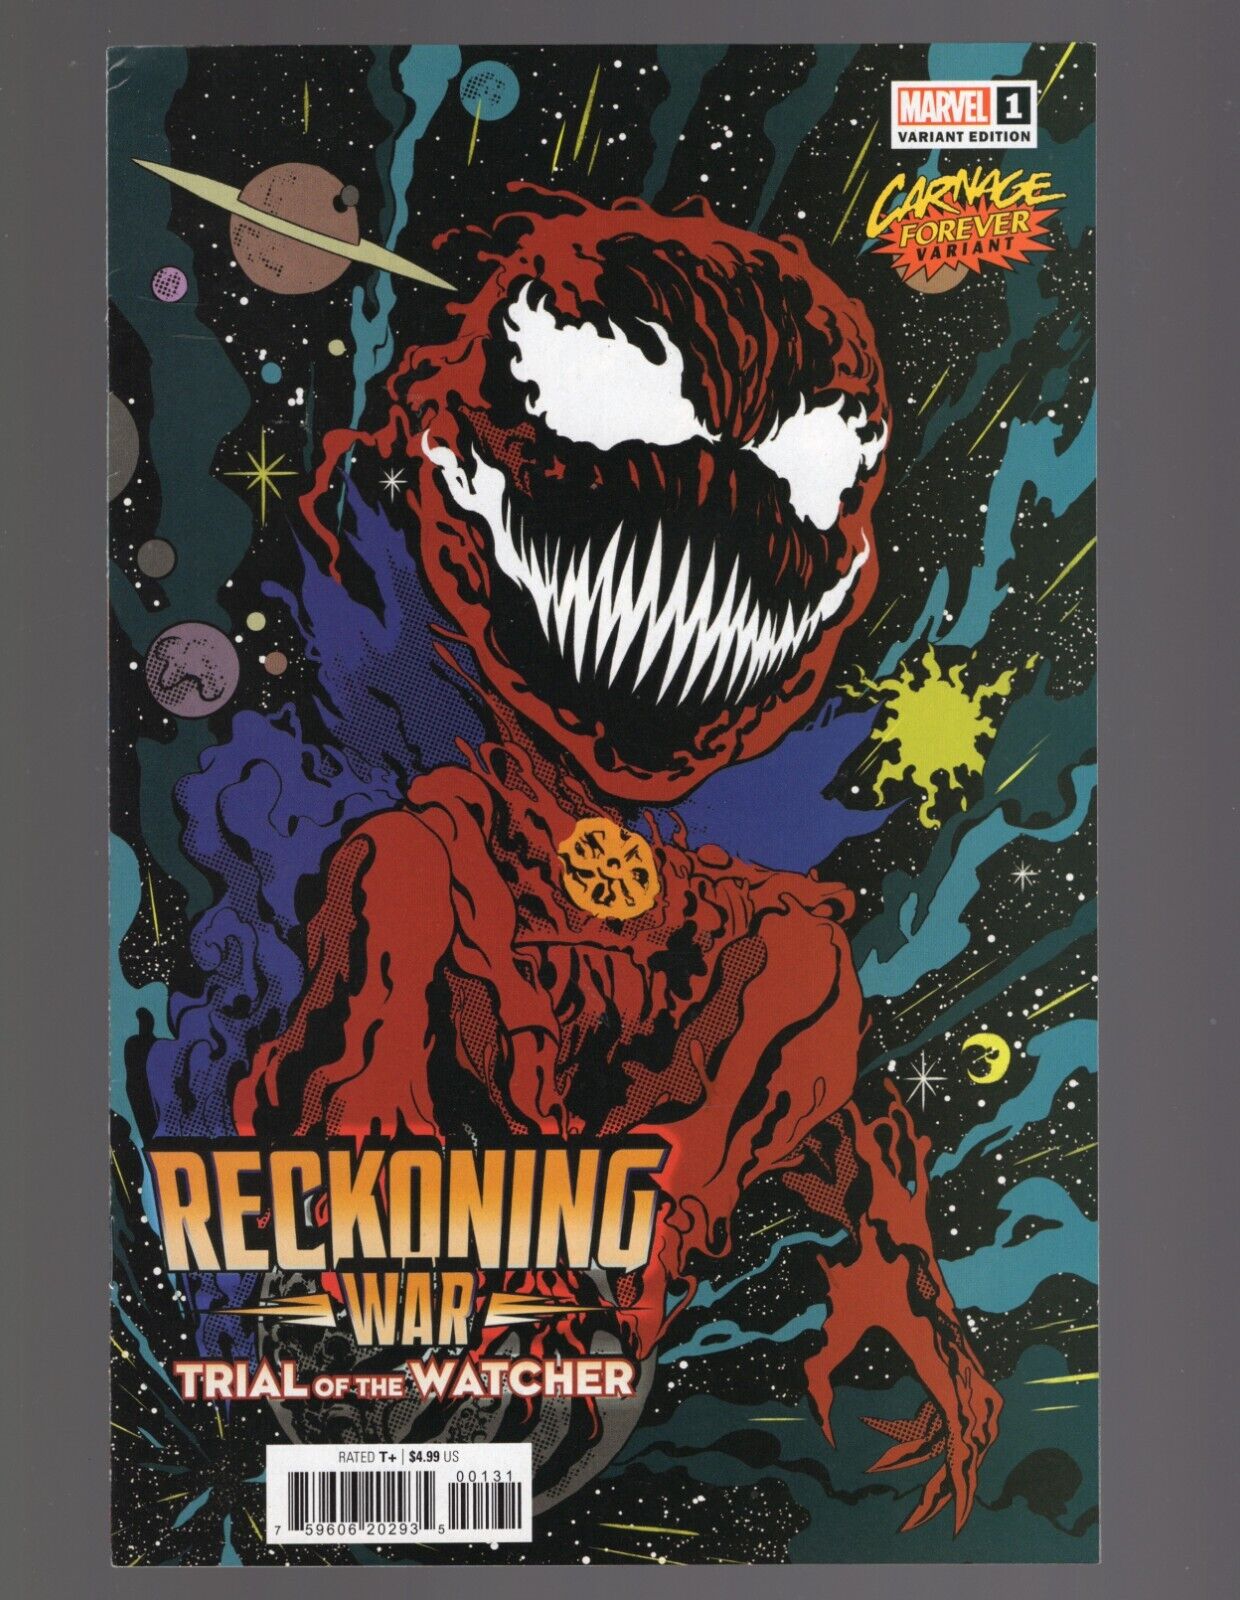 RECKONING WAR TRIAL Of The WATCHER #1 2022 Carnage Forever Cover Variant NM 9.6